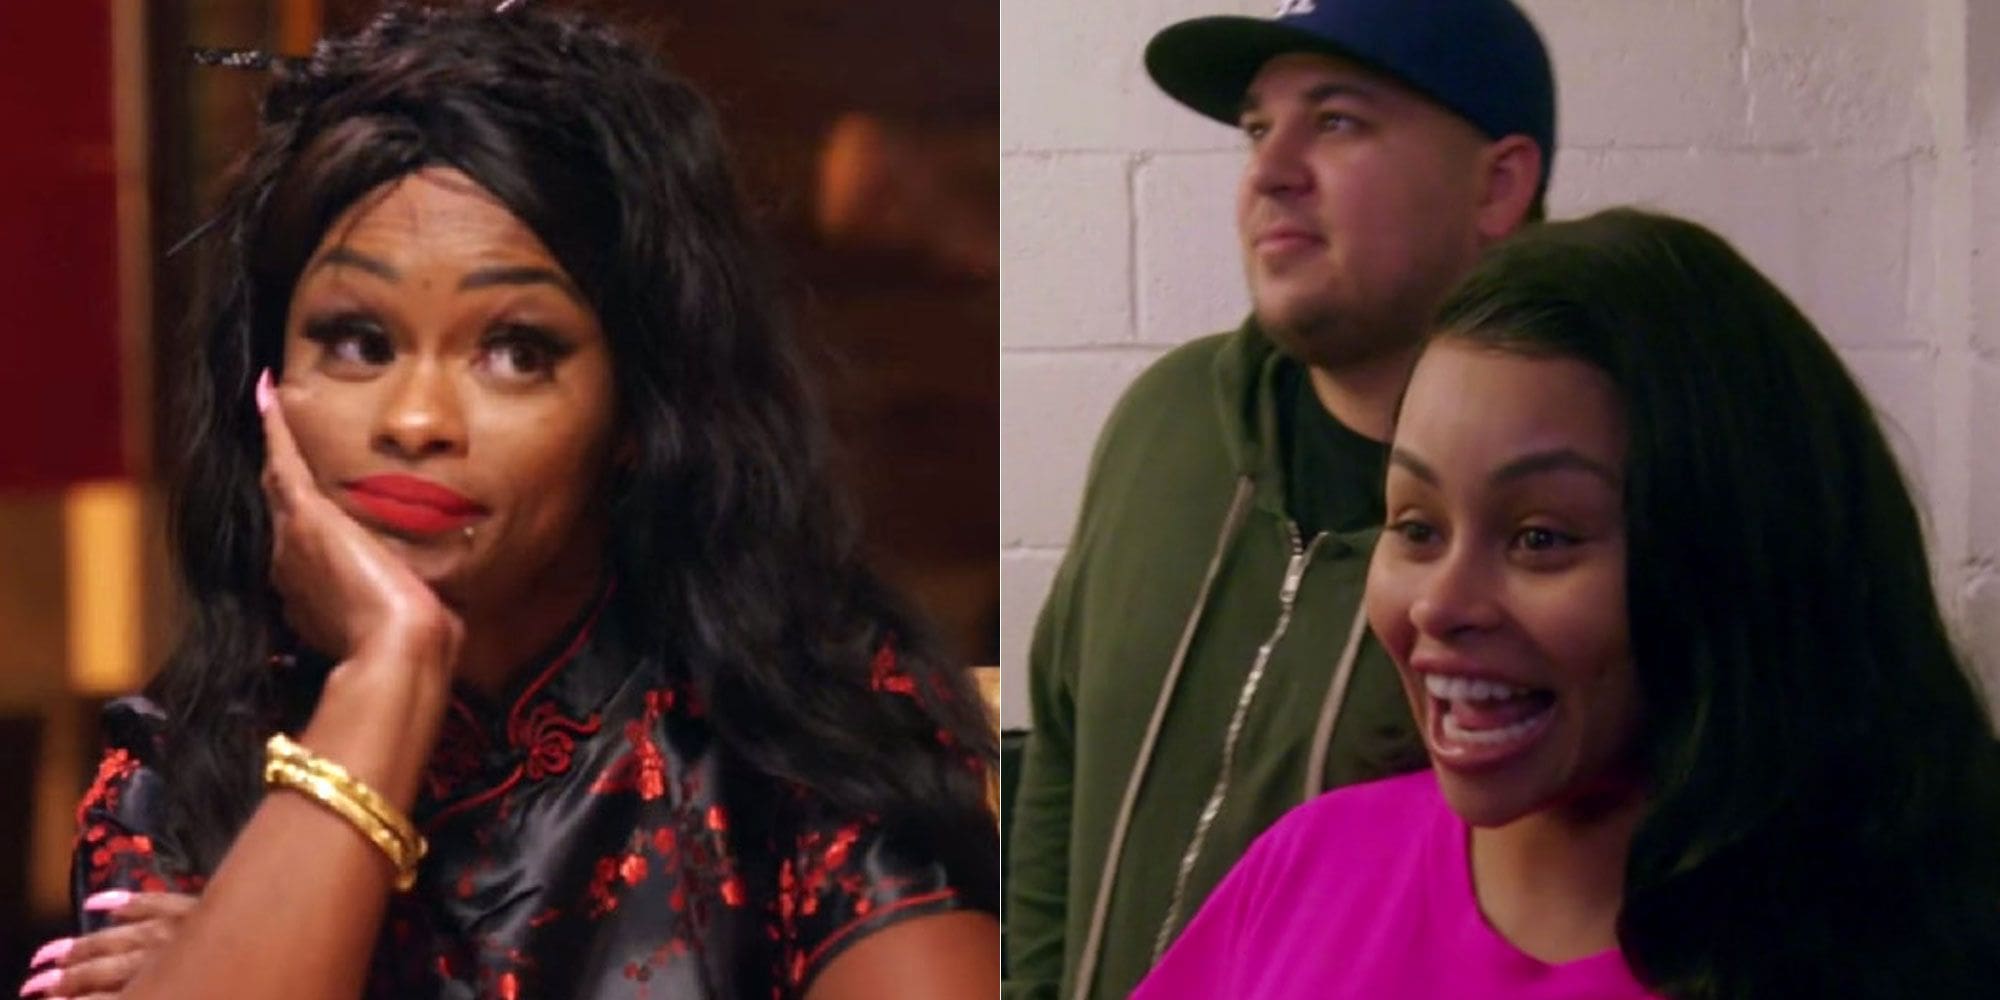 Blac Chyna's Teaser Video For Her Mom, Tokyo Toni's TV Show Has Fans Freaking Out